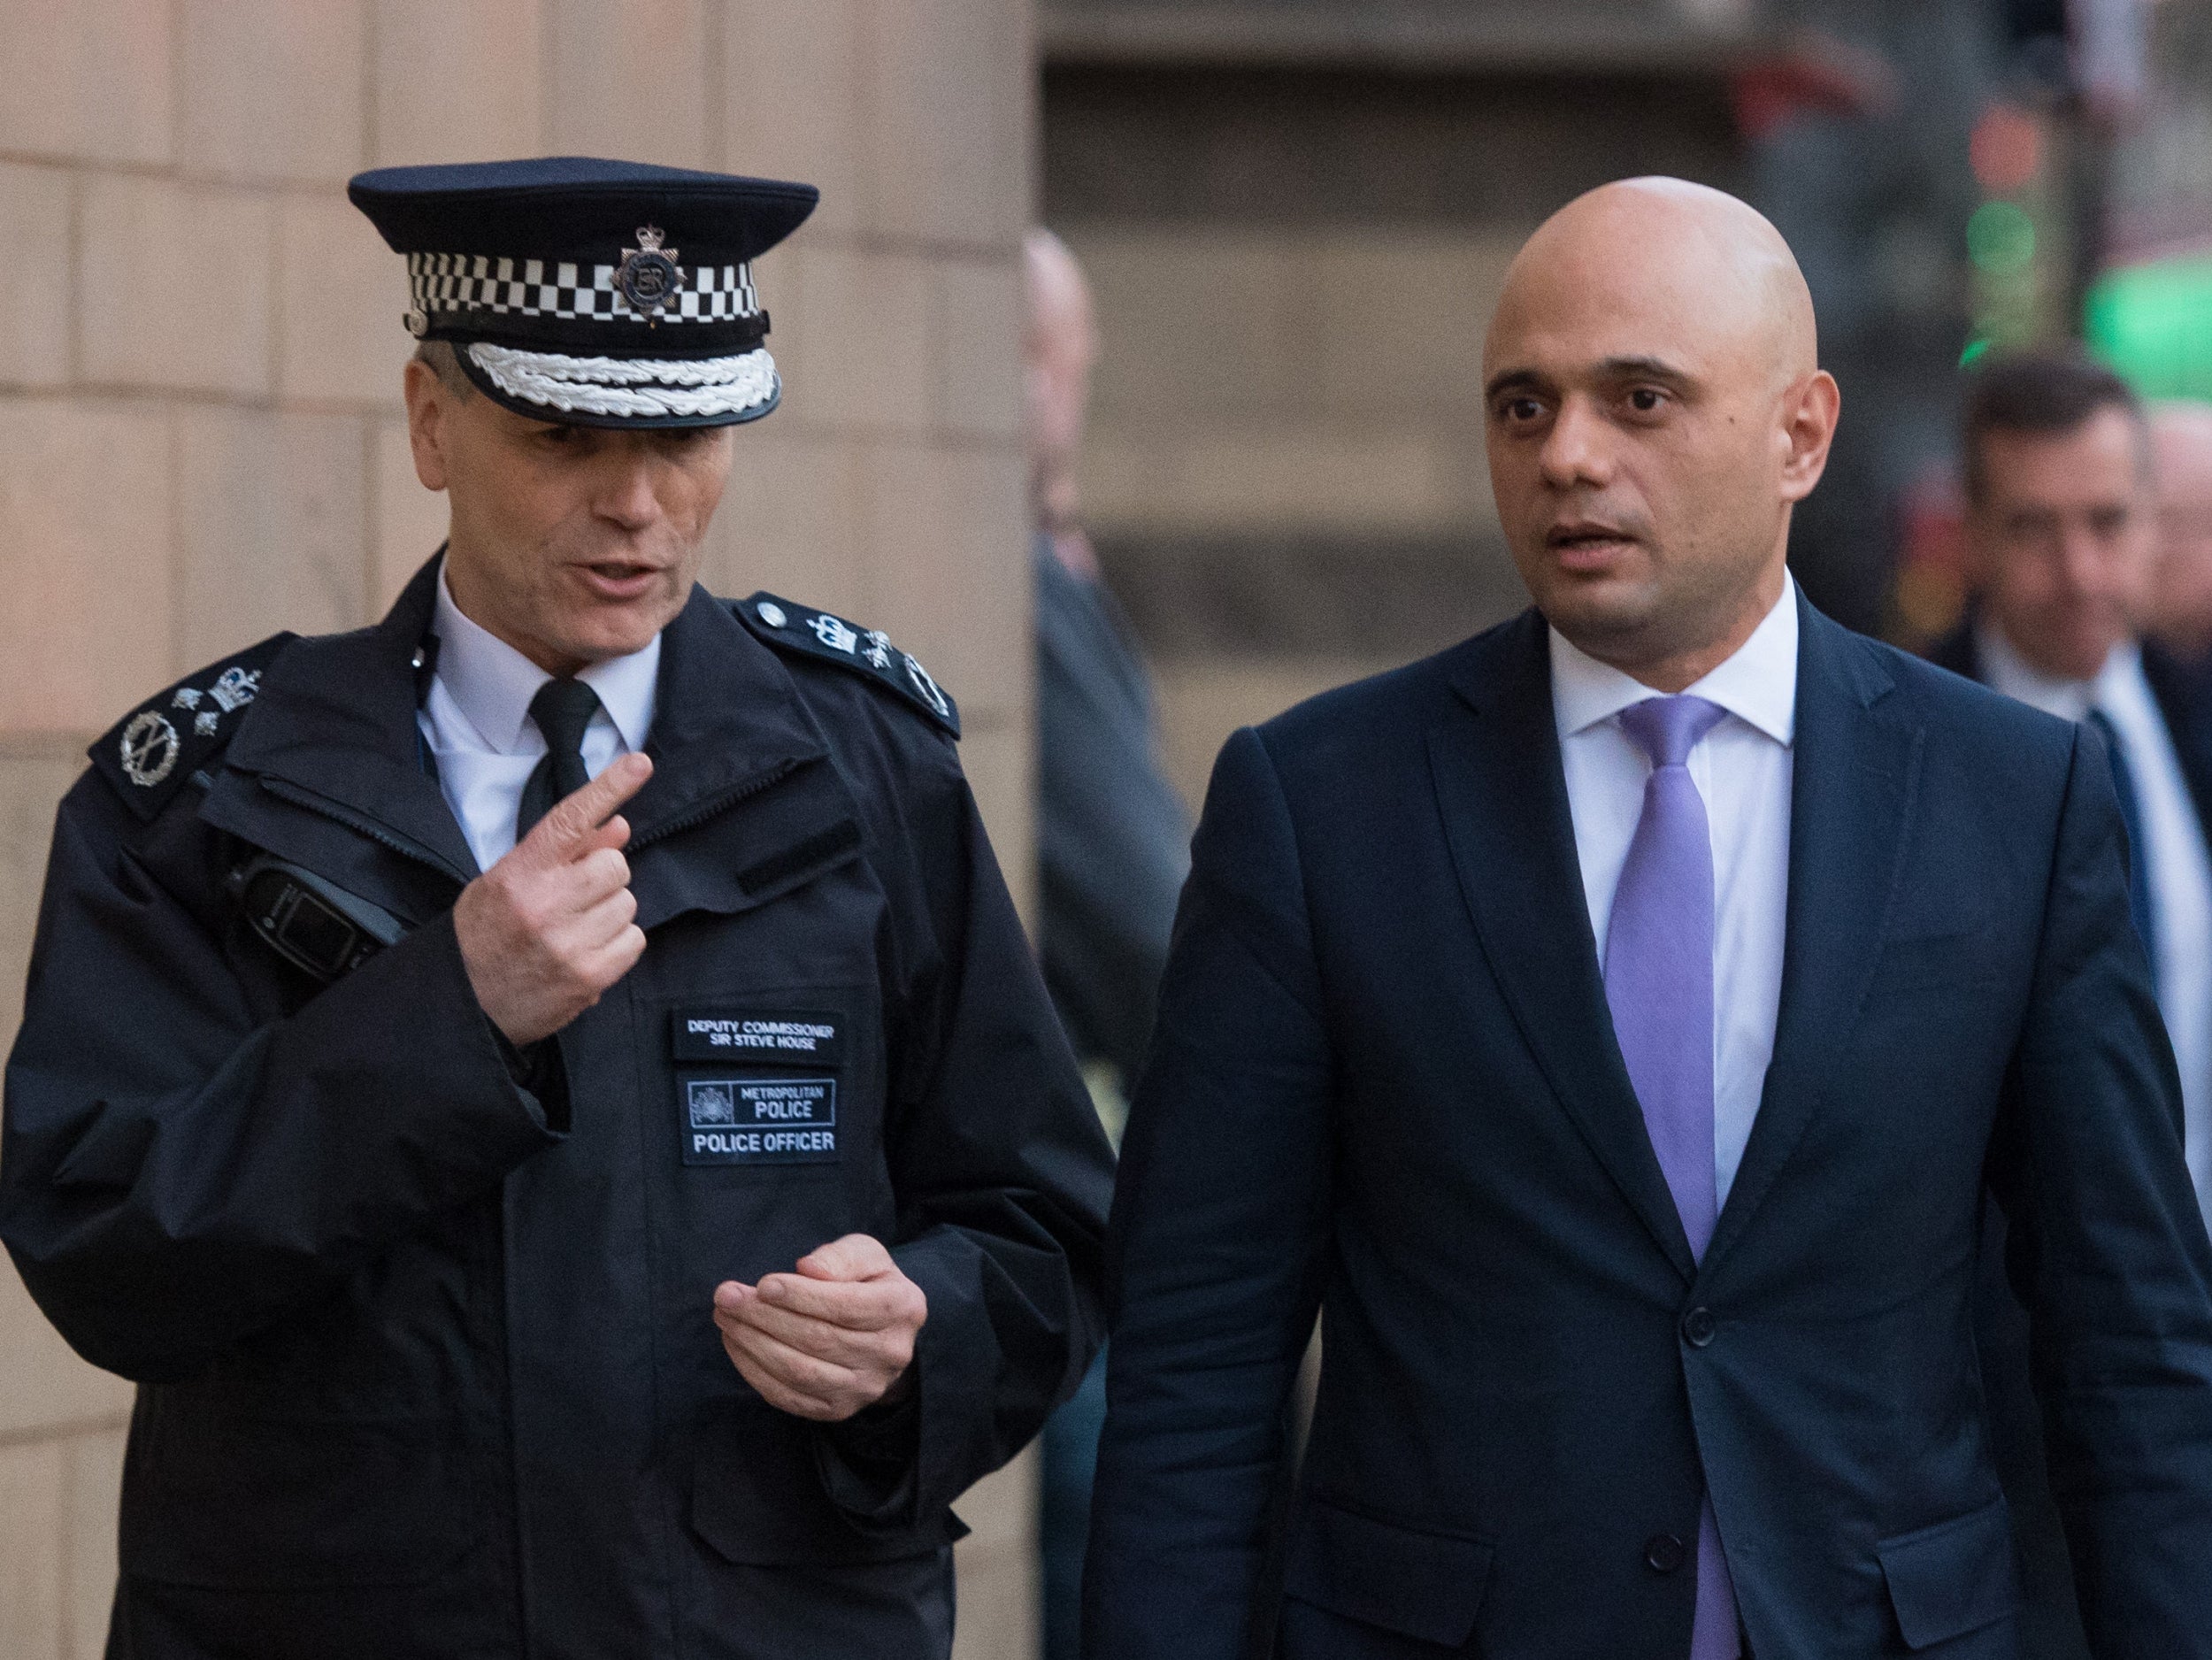 Sajid Javid is expanding Section 60 powers nationally